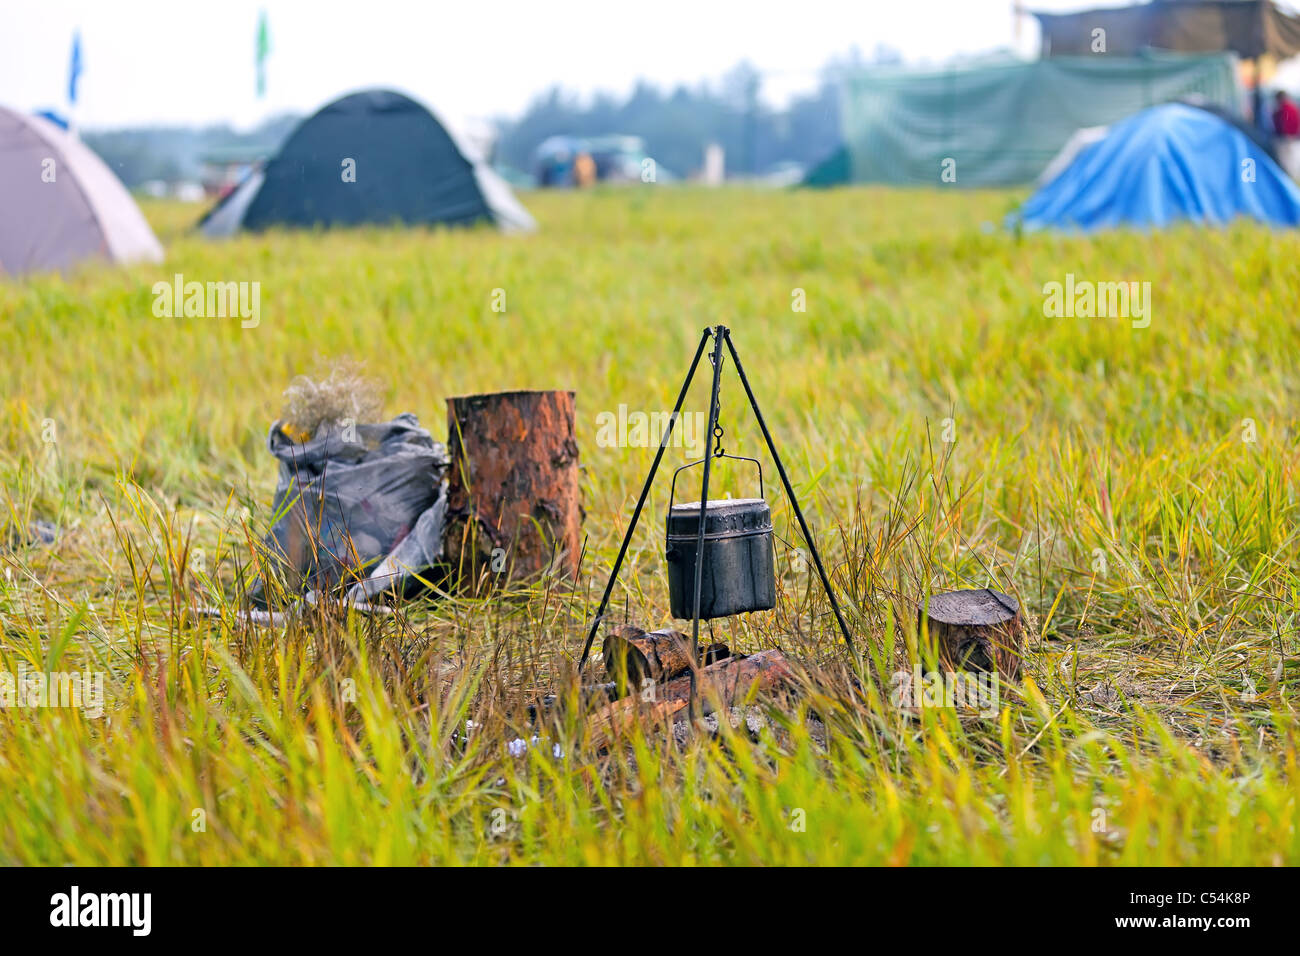 https://c8.alamy.com/comp/C54K8P/campfire-with-kettle-in-the-grass-at-camp-C54K8P.jpg